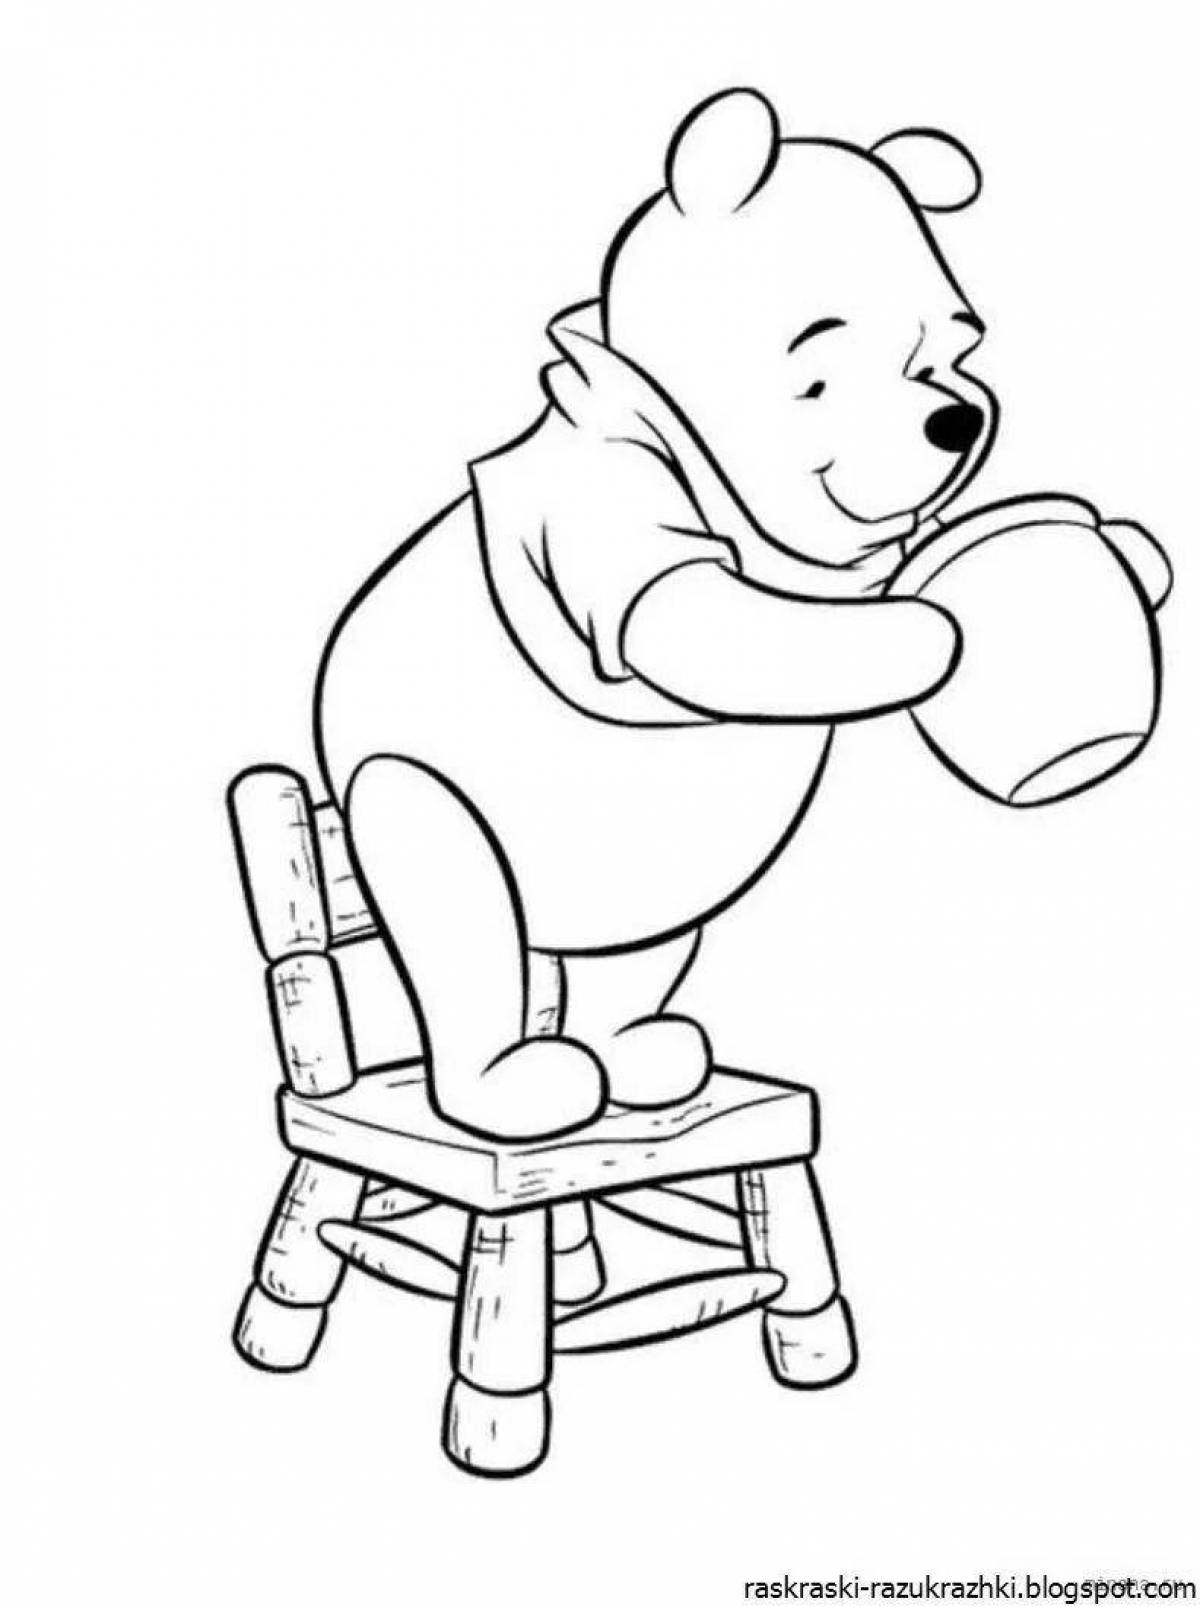 Colorful winnie the pooh coloring page